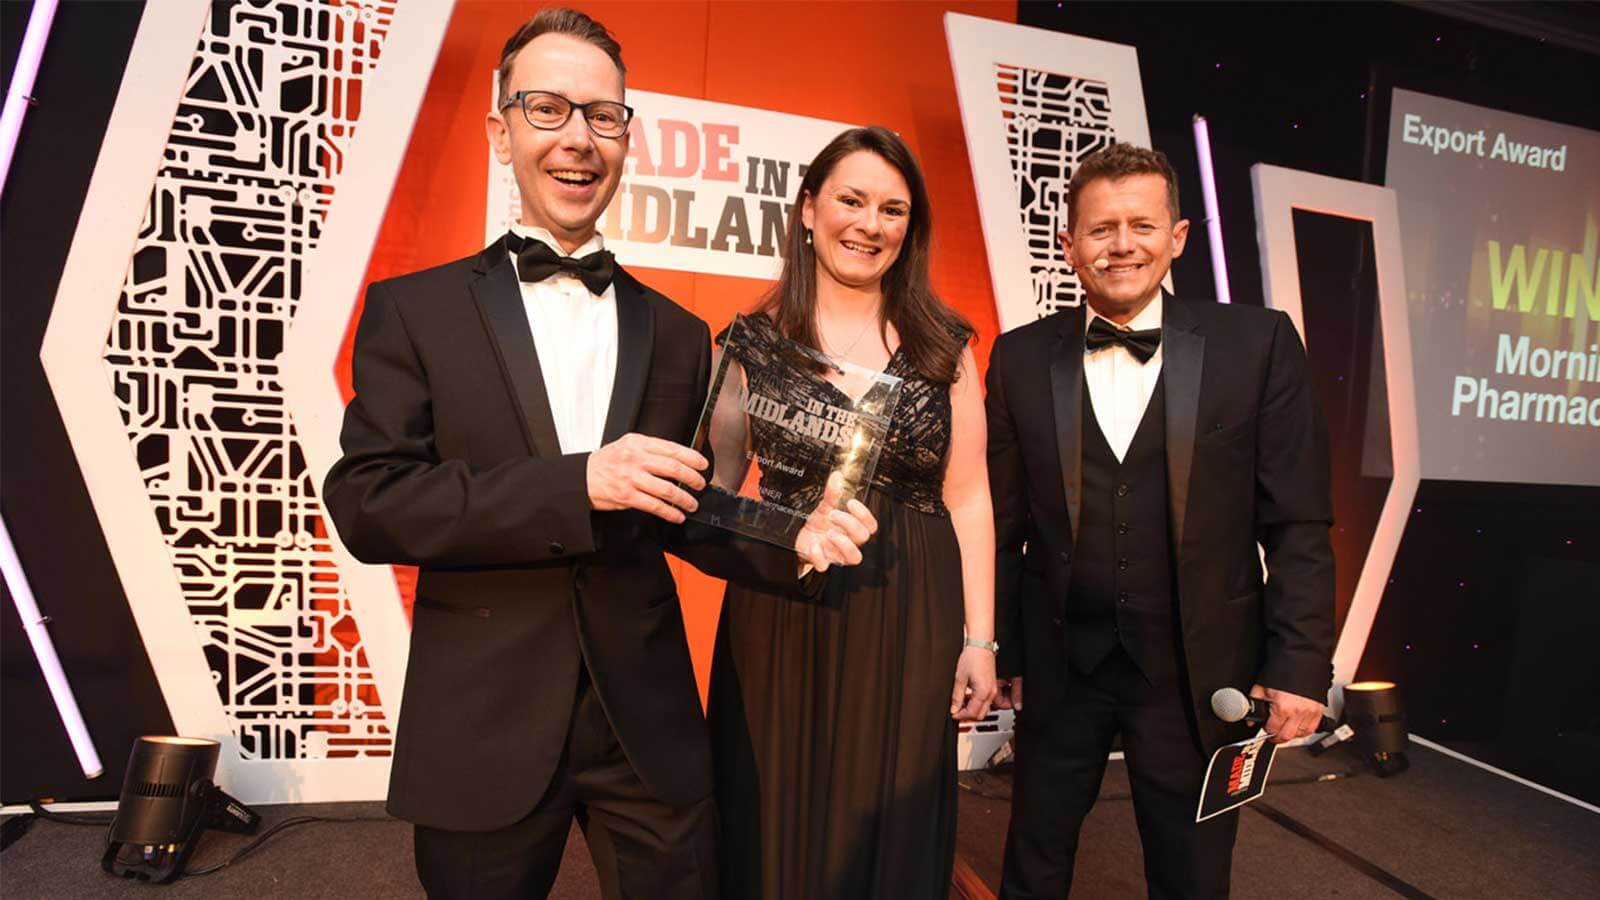 Alex Claydon accepts an Insider Media Made in the Midlands Award from the BBC's Mike Bushell